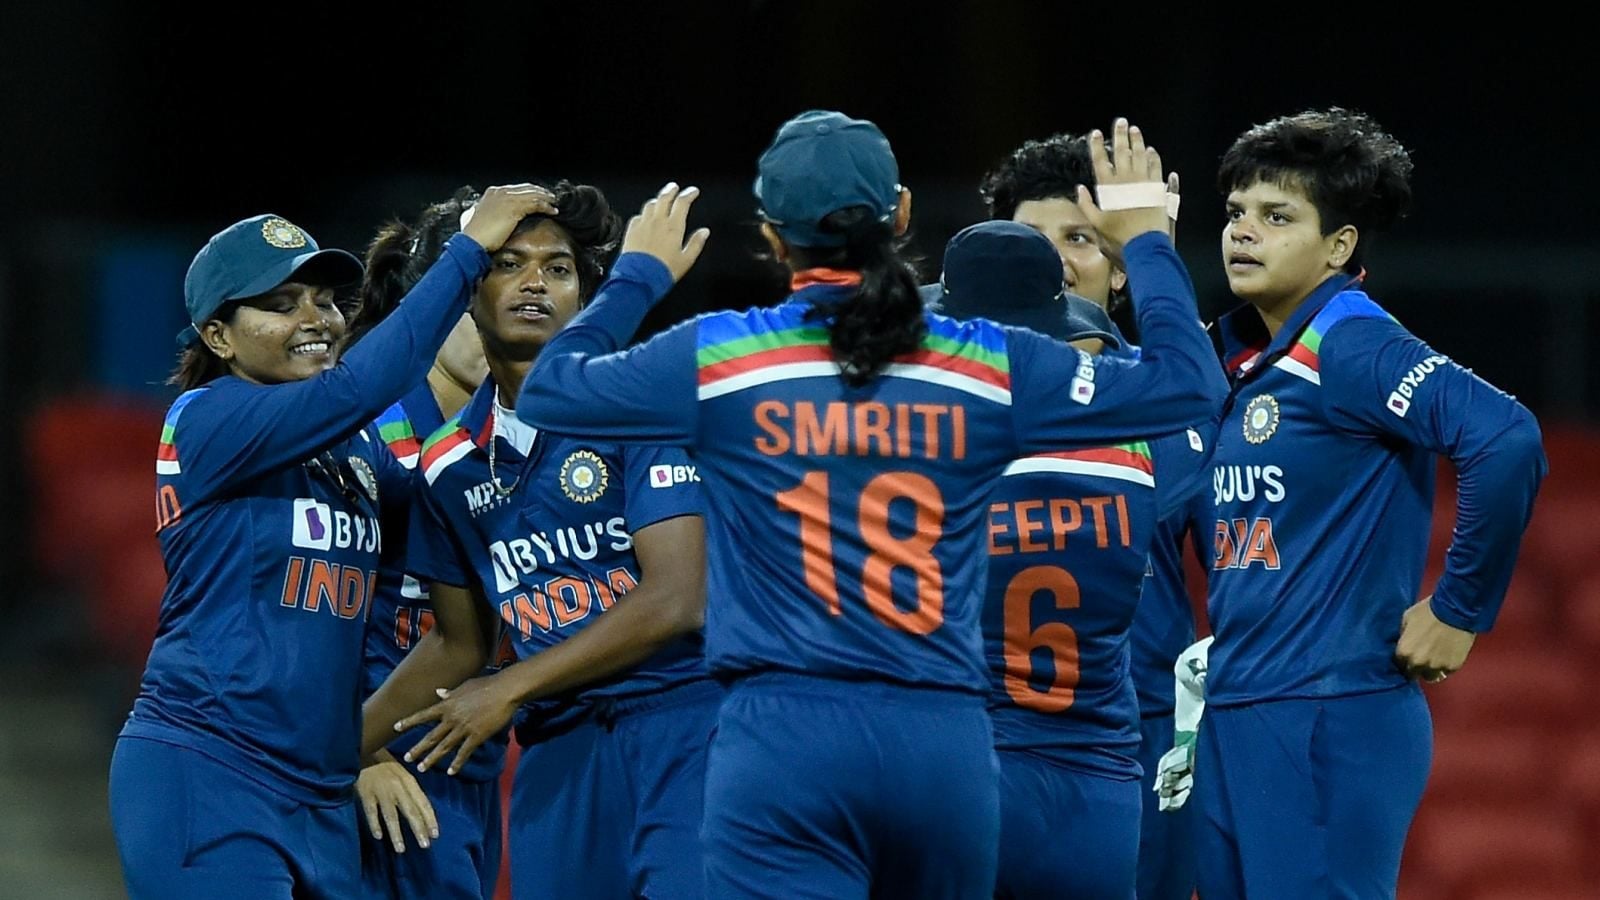 ICC Women’s World Cup 2022 Complete Schedule: Know When India Play Pakistan and Other Opponents